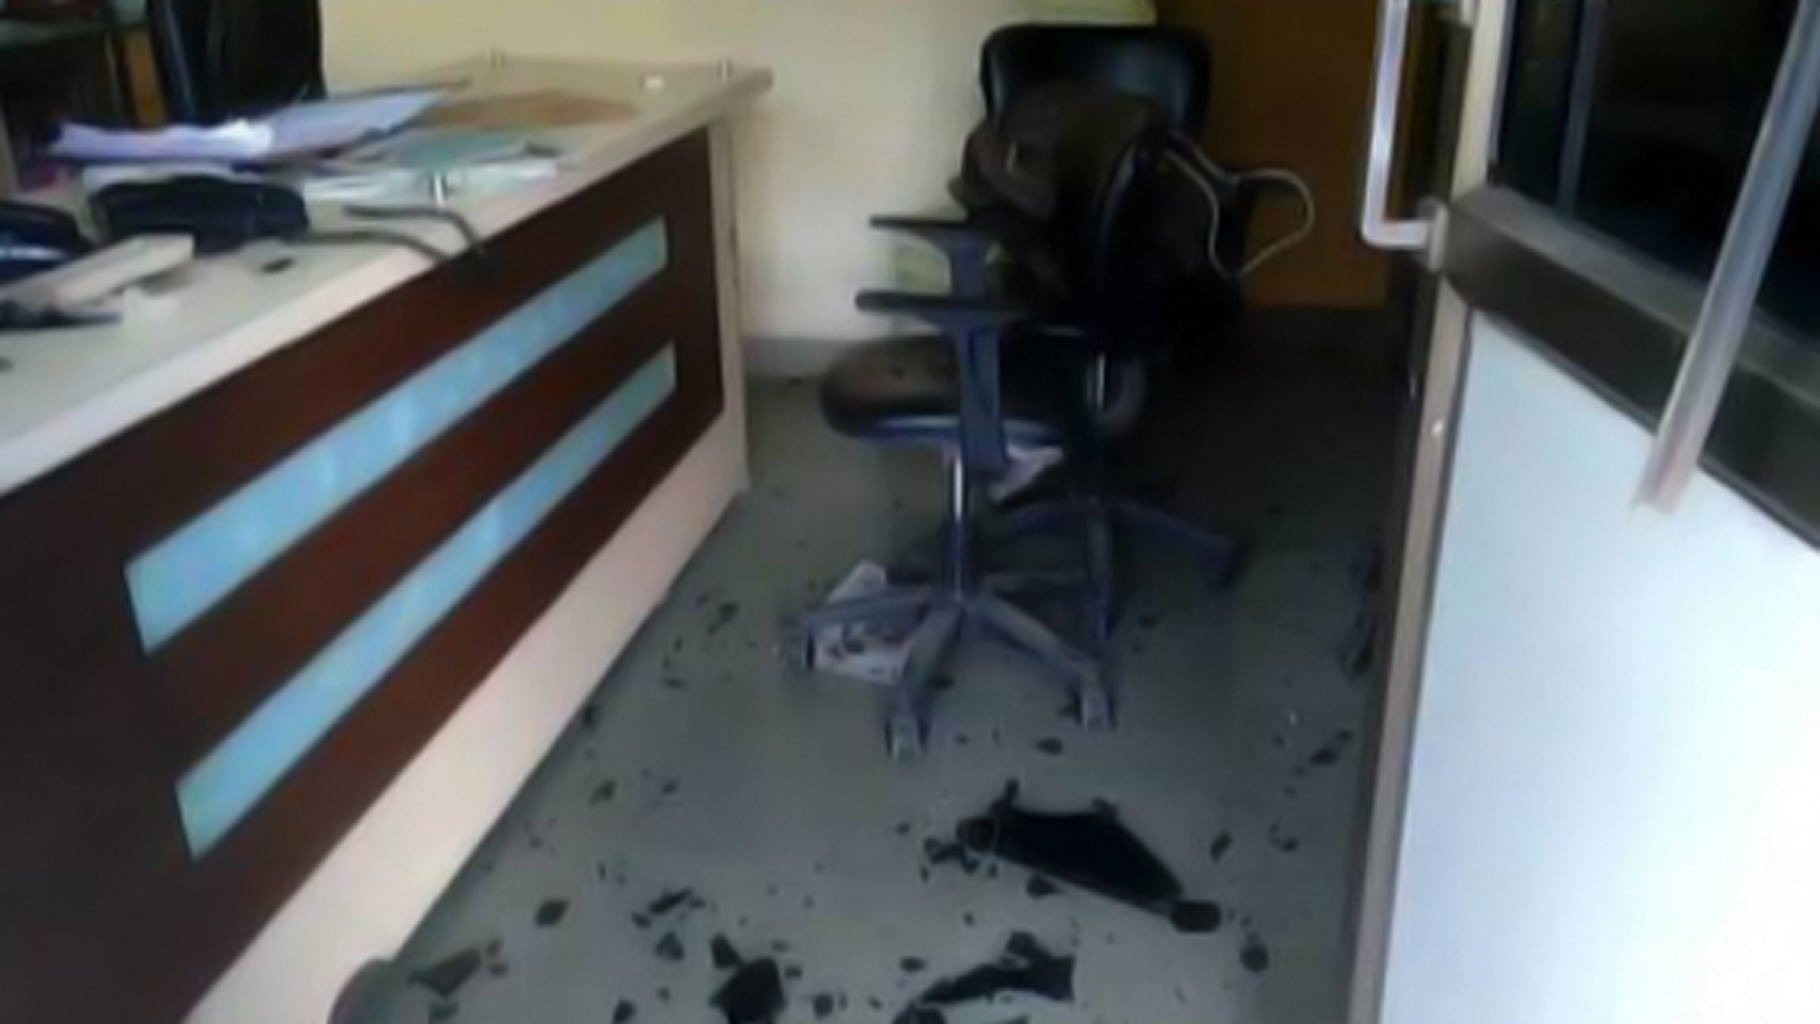 Pictures allegedly from the ABVP Mumbai office after the attack. (Photo Courtesy: <a href="https://twitter.com/ABVPPune">ABVP Pune’s Twitter feed</a>)